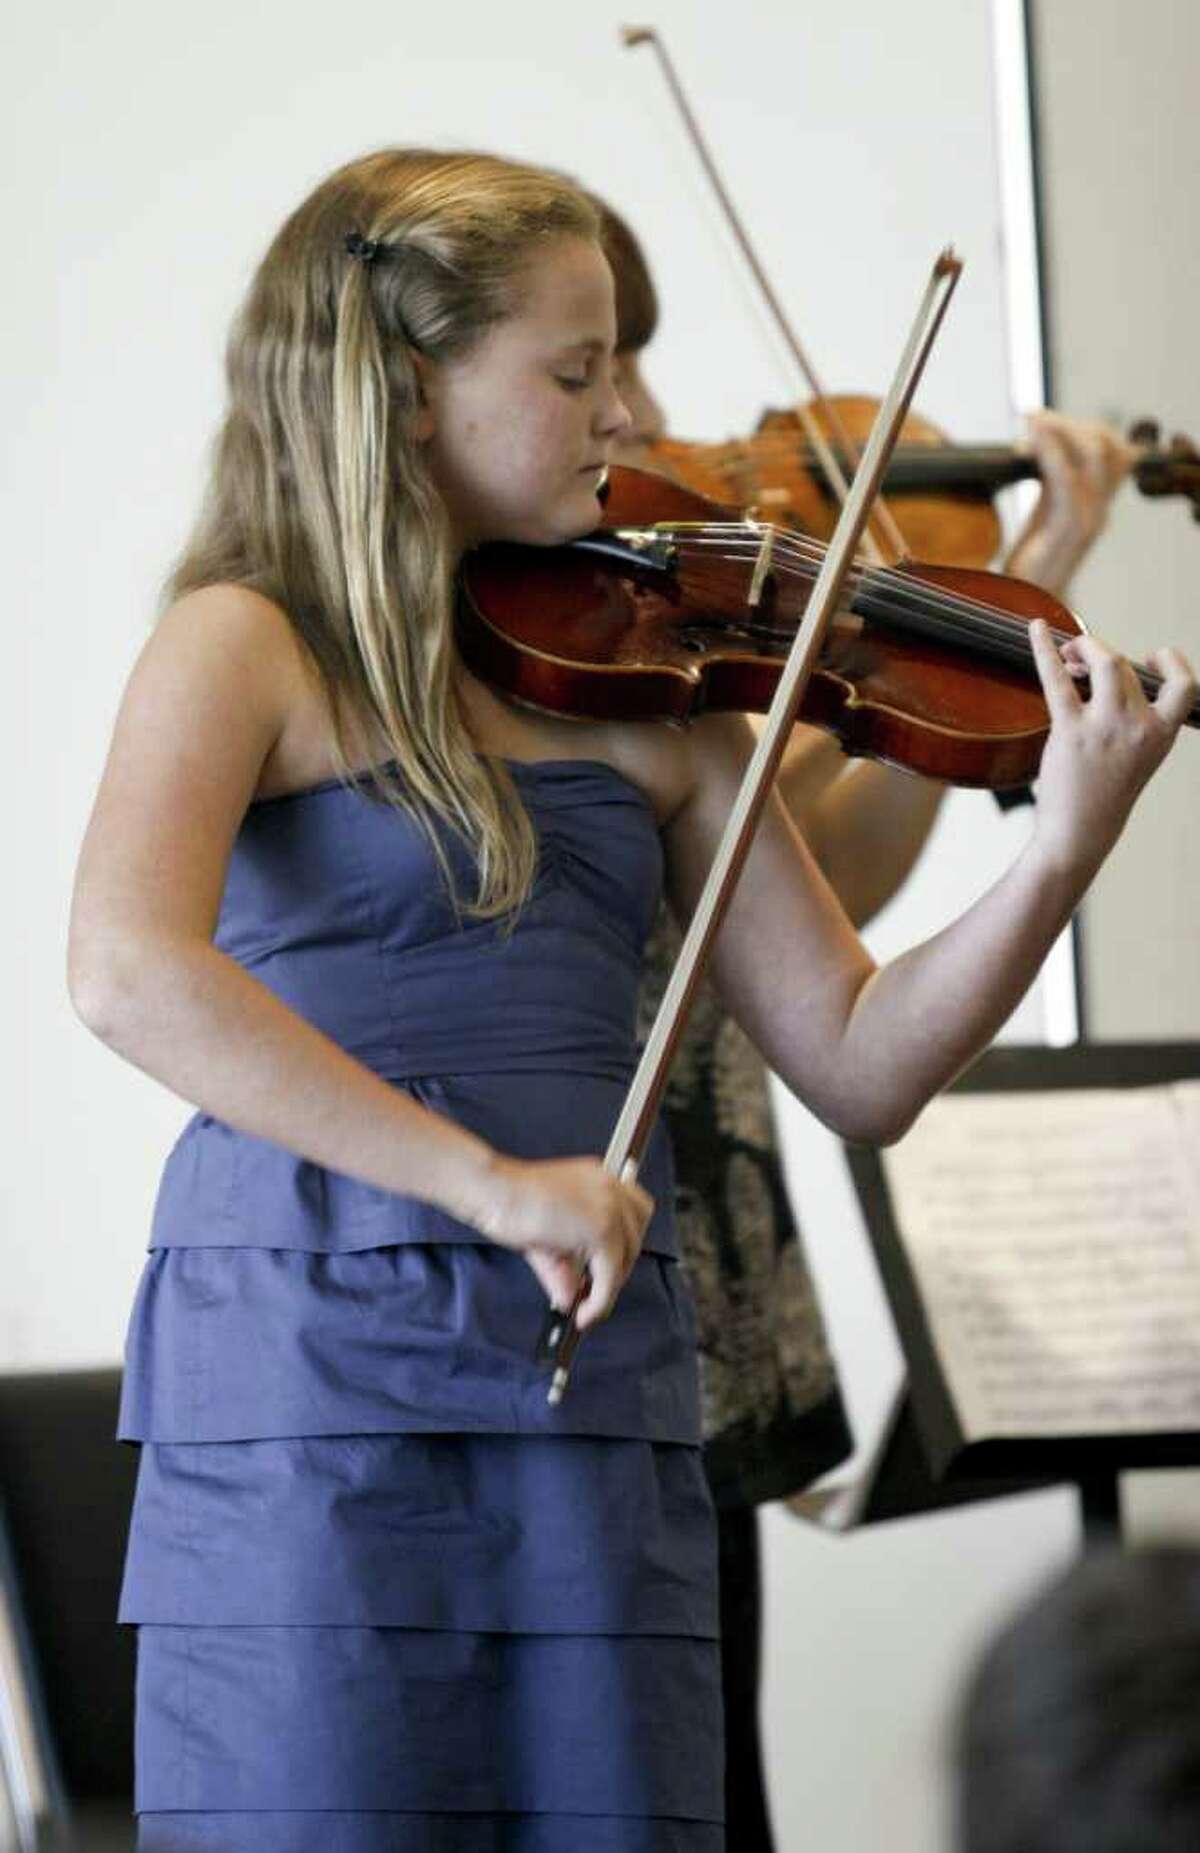 Anna Leunis of Darien, age 14, performs a duet with Asya Meshberg, Artistic Director of the Chamber Music Institute for Young Musicians, after receiving an award and scholarship from the Stamford Center for the Arts on Sunday, August 8, 2010.